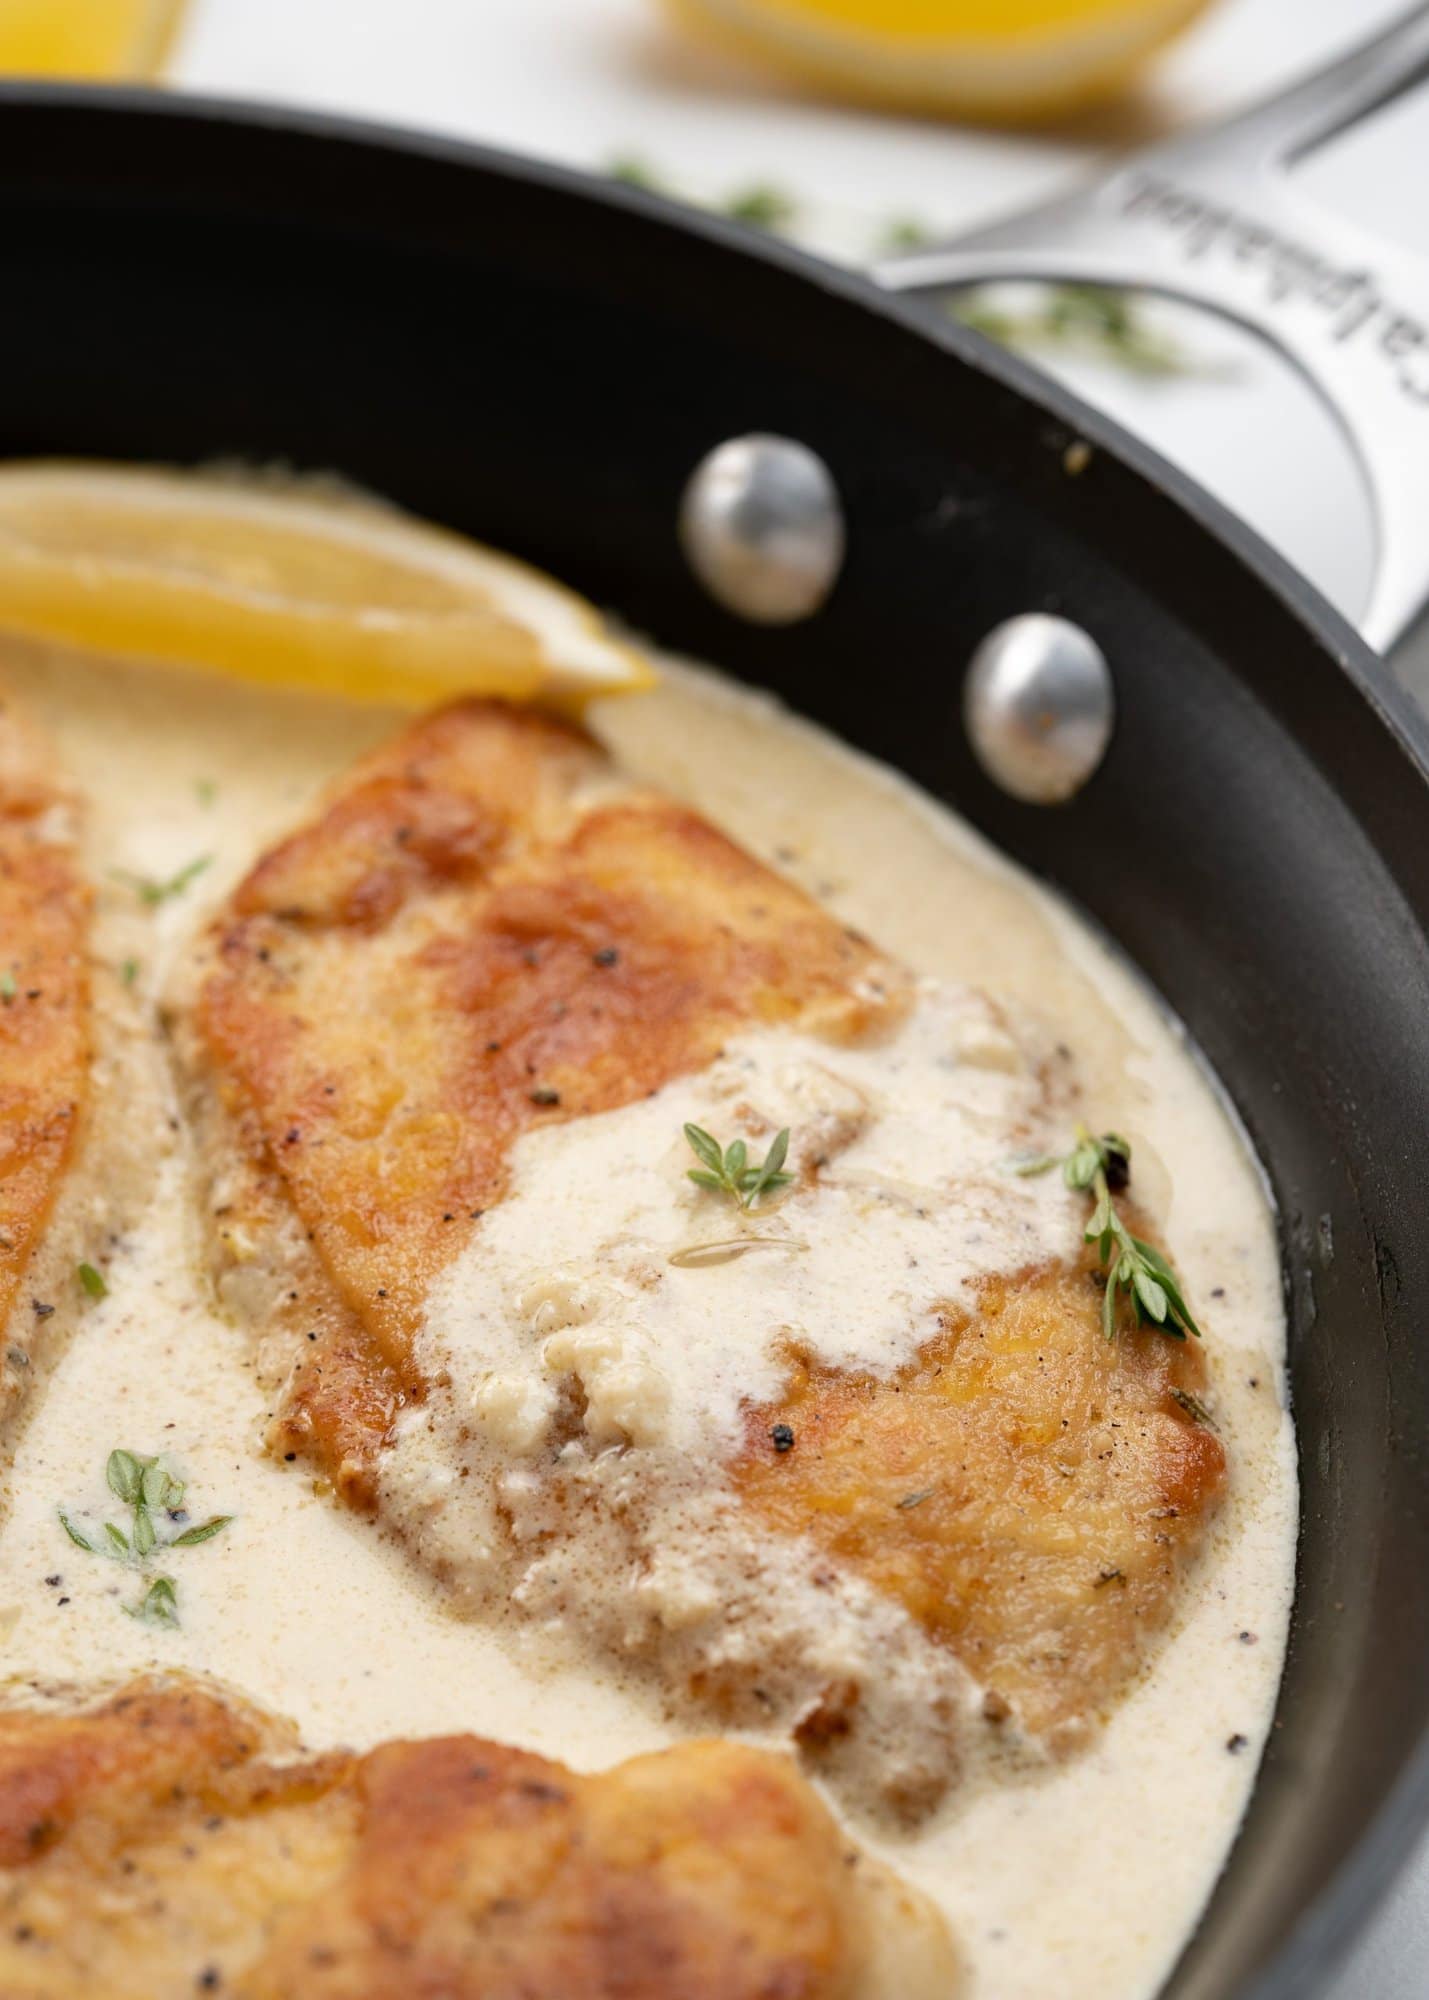 Crispy chicken breast topped with creamy lemon sauce.